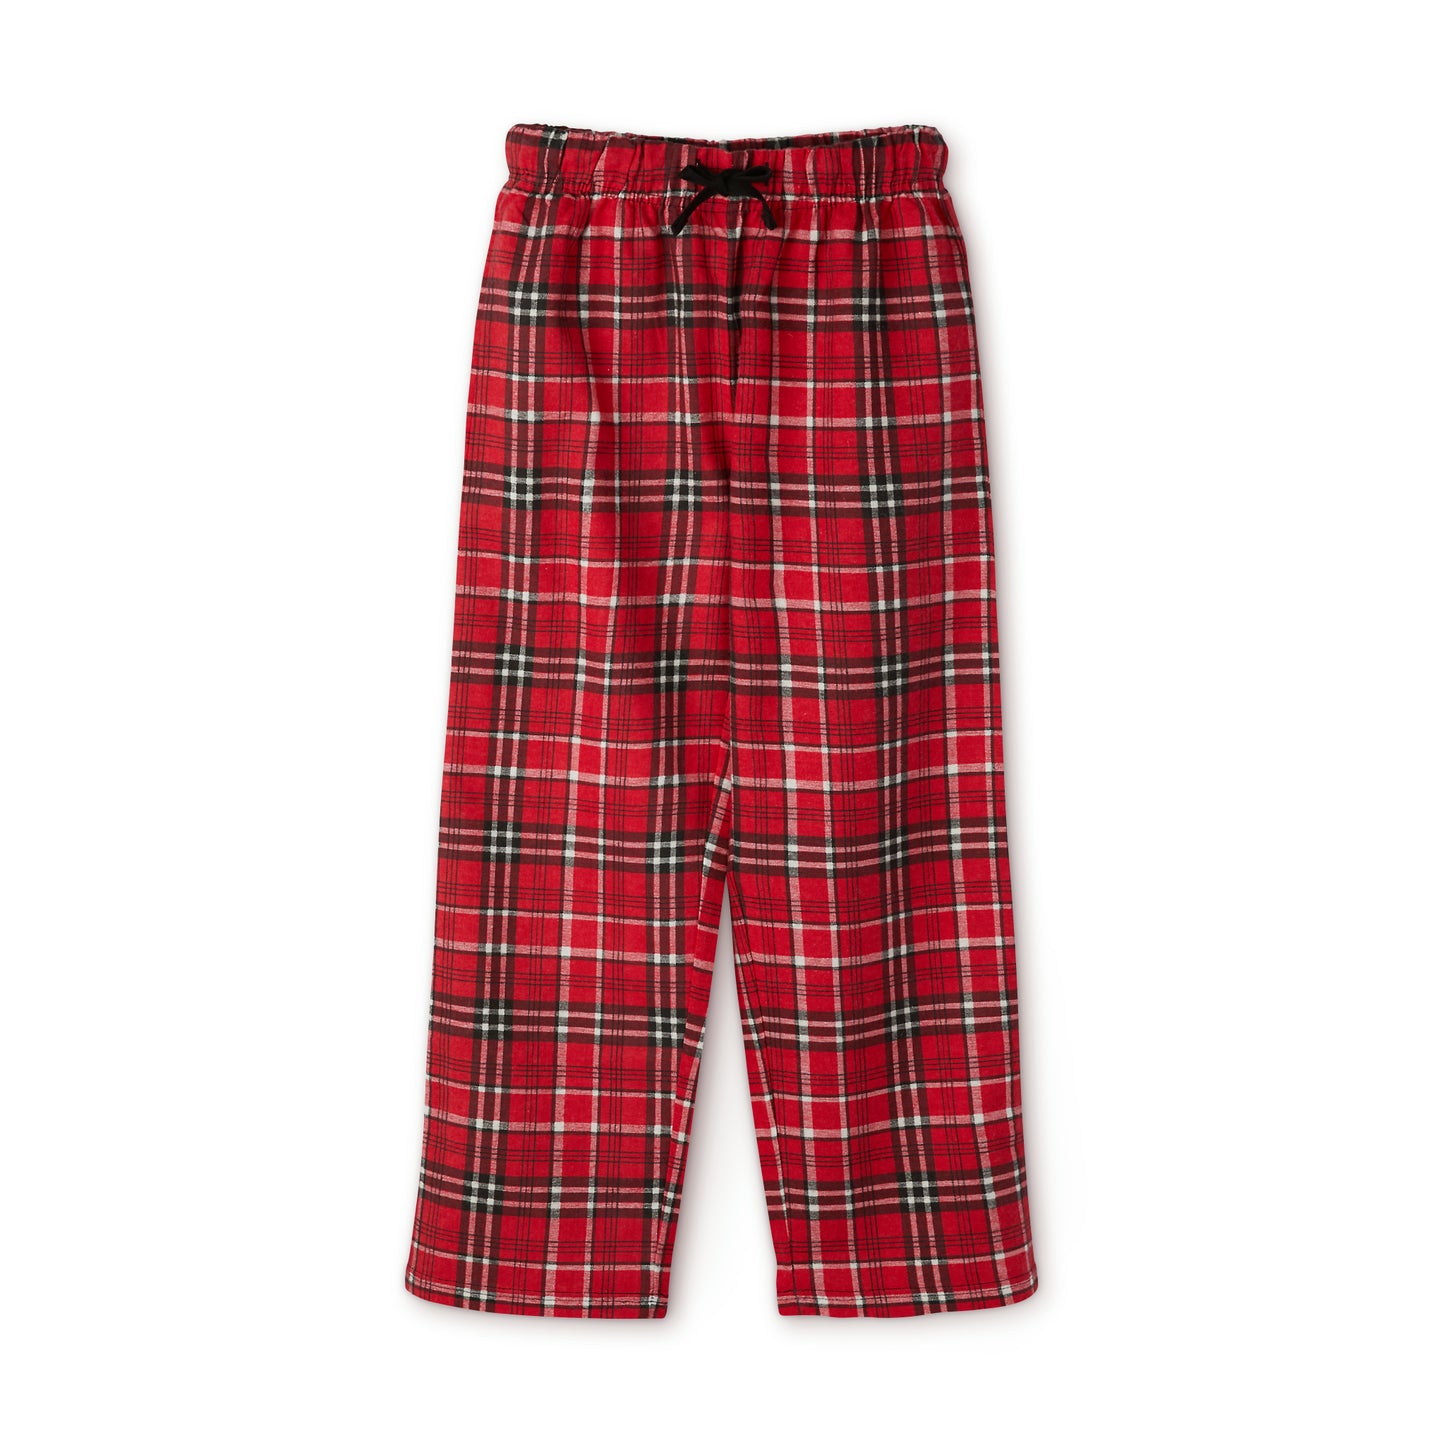 A red and black plaid Youth Holiday-Gnome Long-Sleeve Pajama-Set made of 100% cotton by Printify.